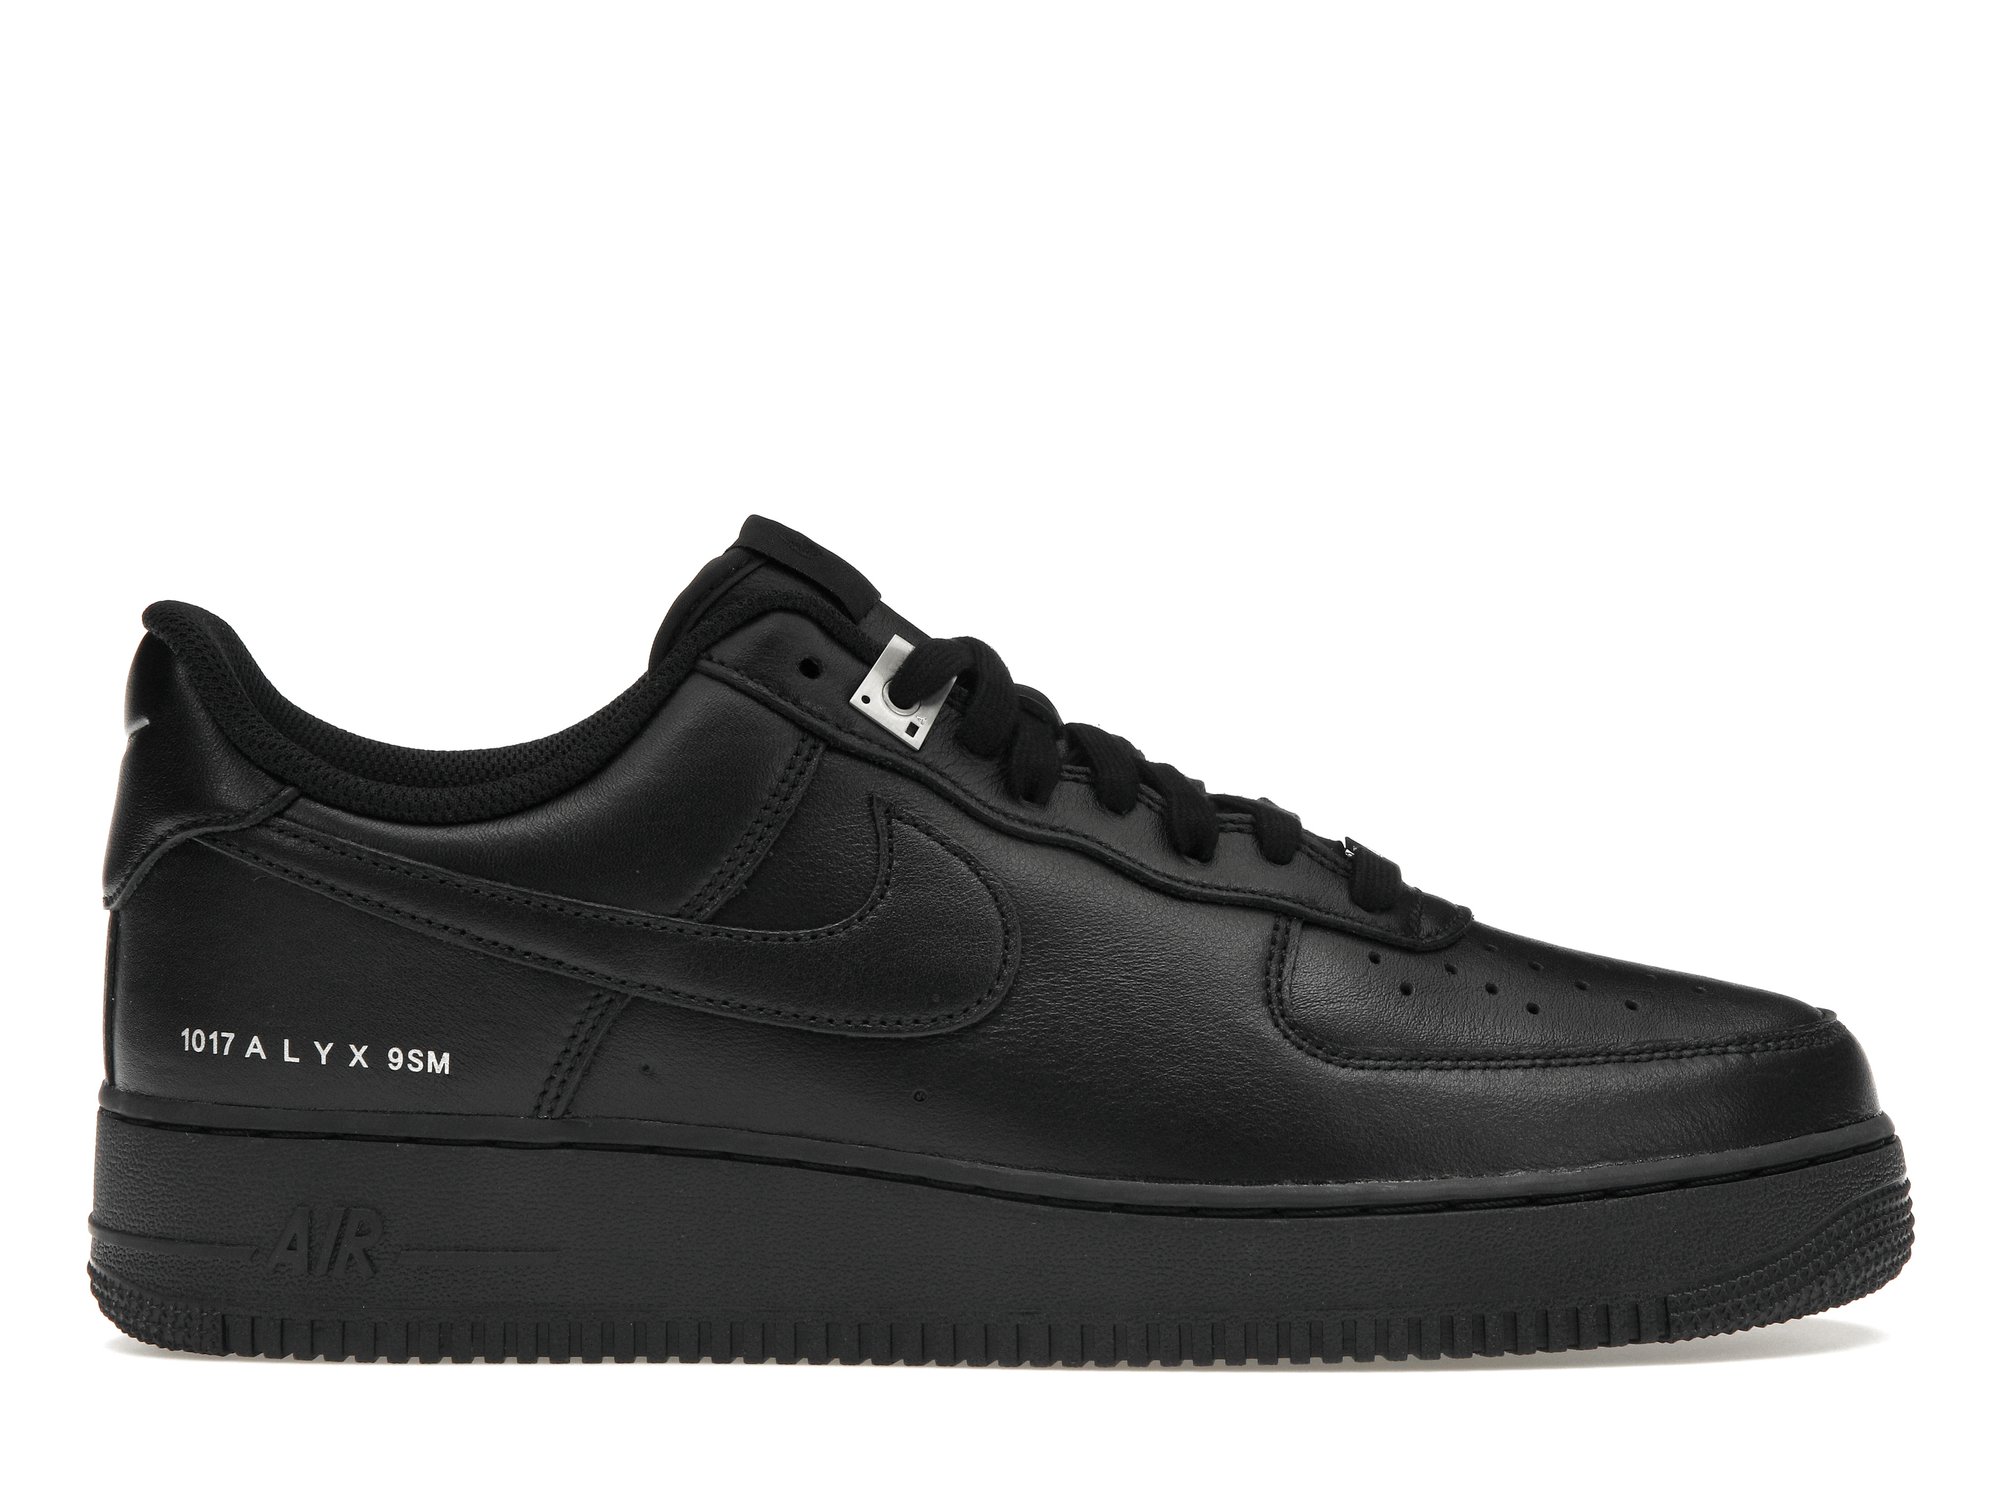 1017 ALYX 9SM × Nike Air Force 1 LowSNK